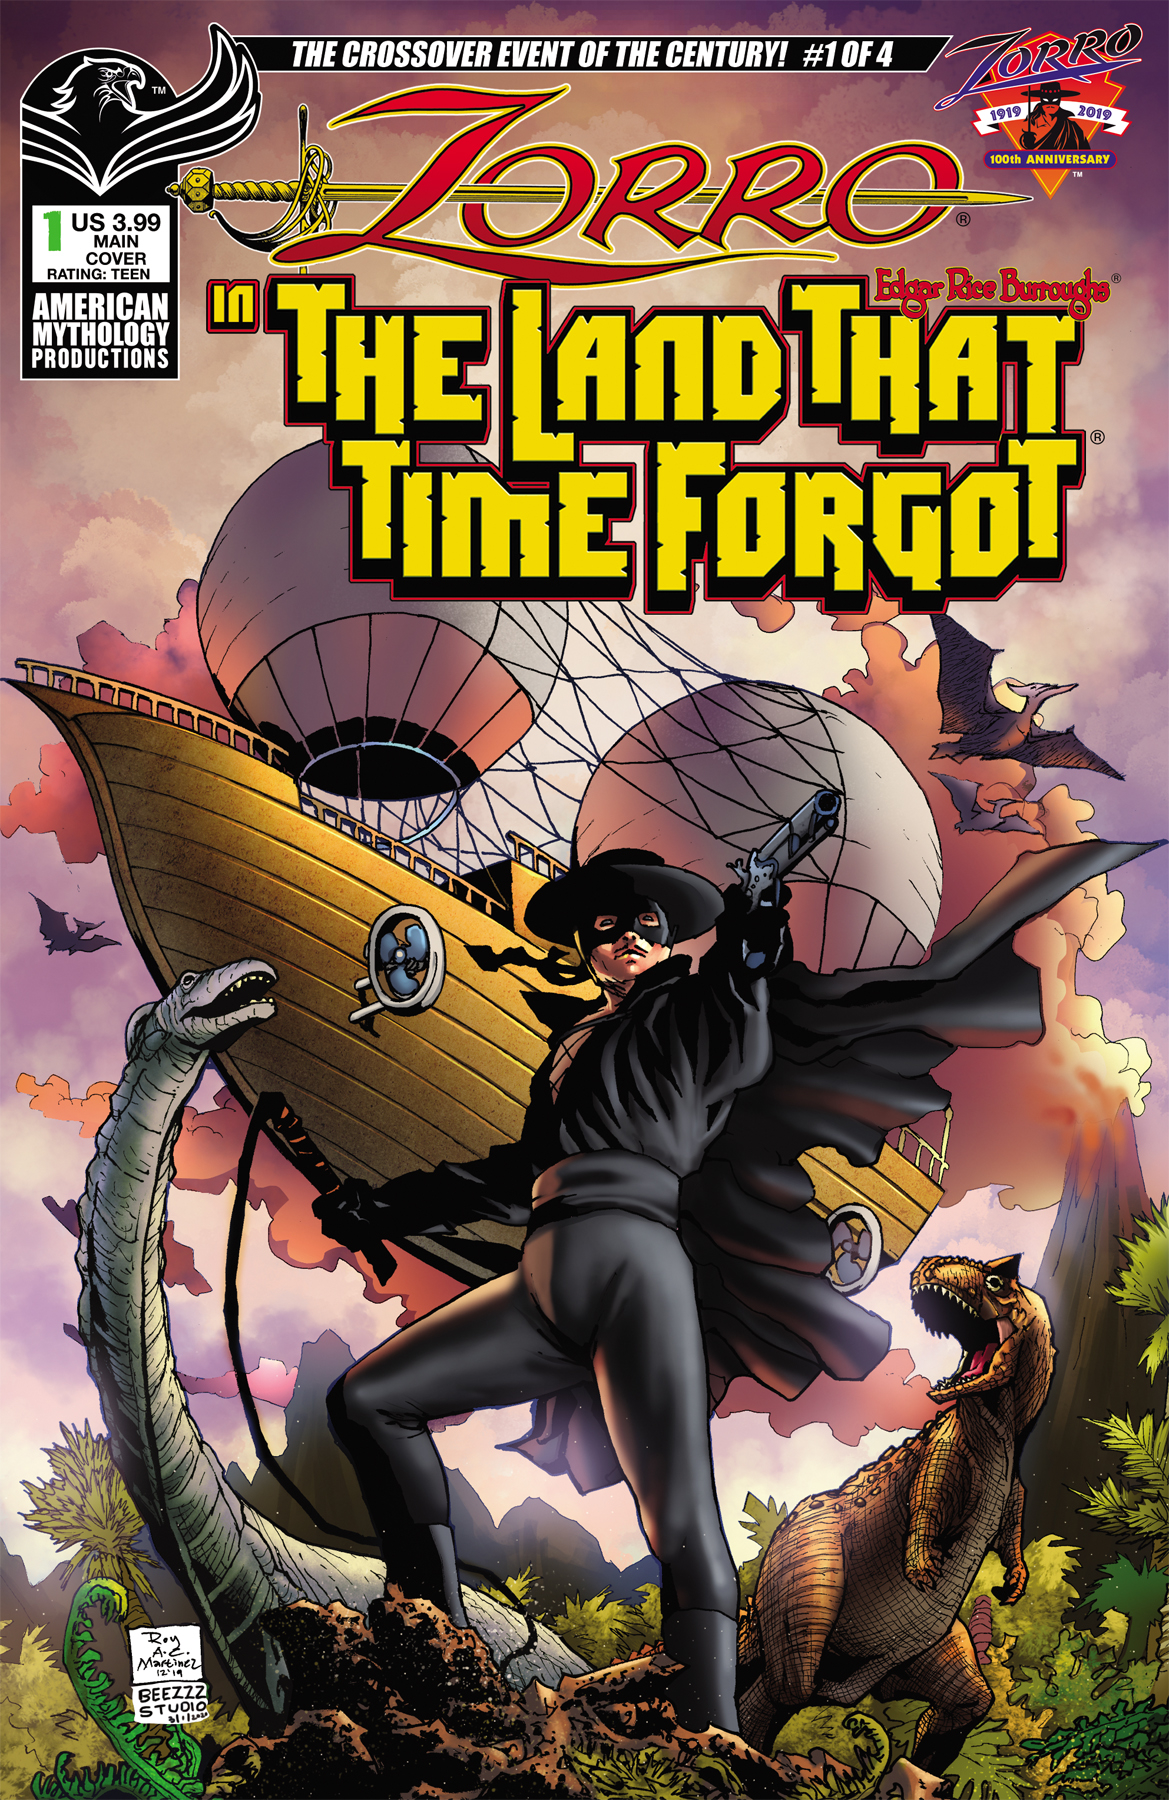 Zorro In Land That Time Forgot #1 Cover A Martinez